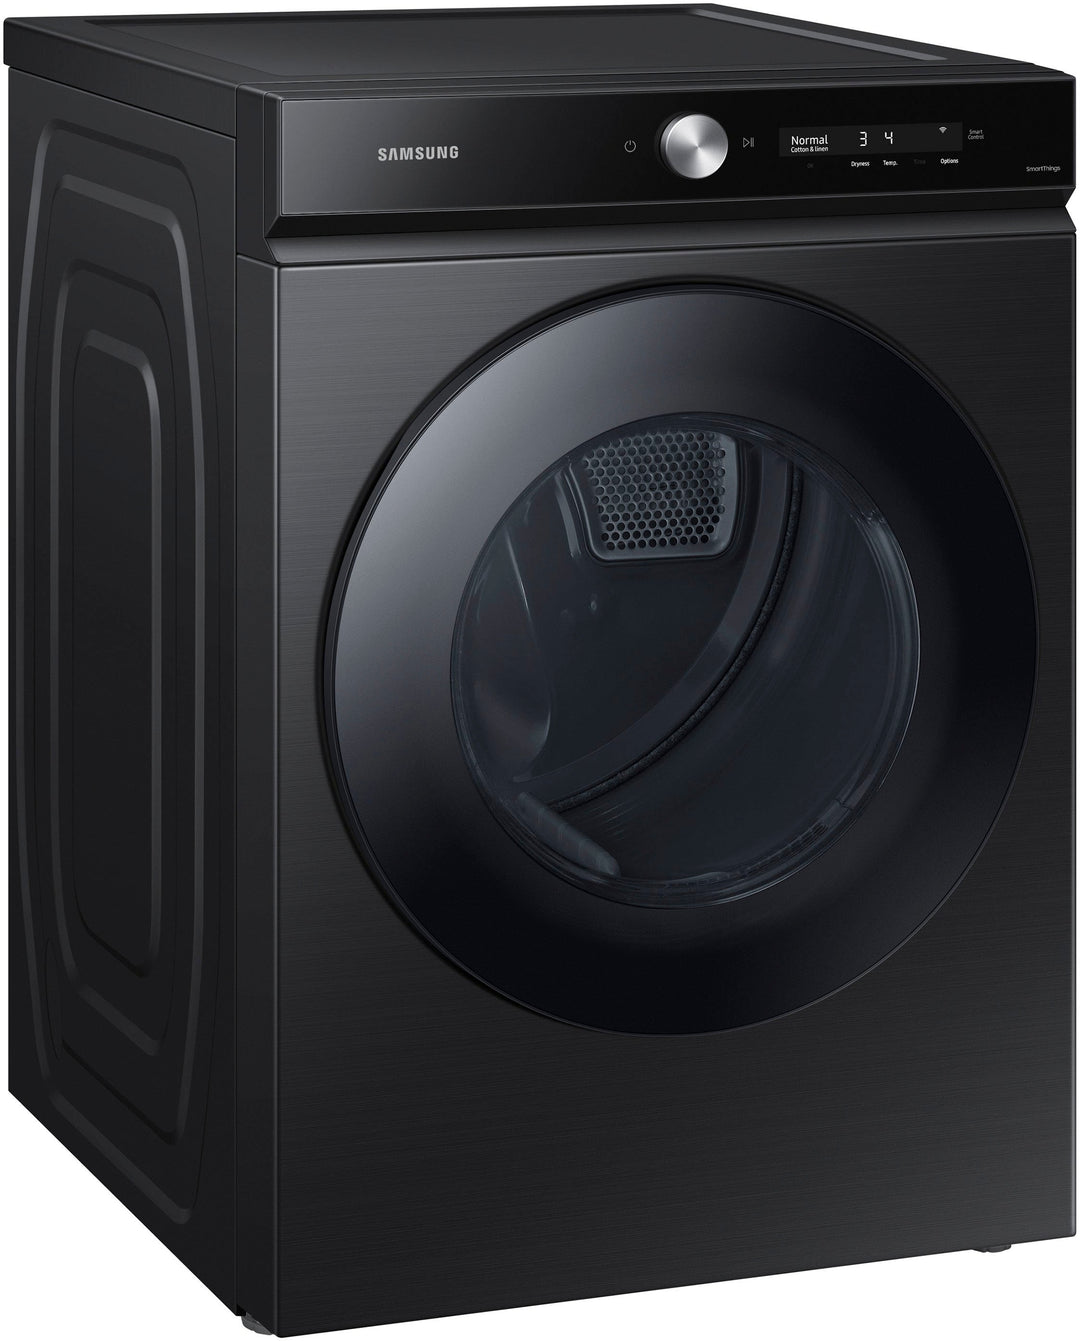 Samsung - Bespoke 7.6 cu. ft. Ultra Capacity Electric Dryer with Super Speed Dry and AI Smart Dial - Brushed black_3